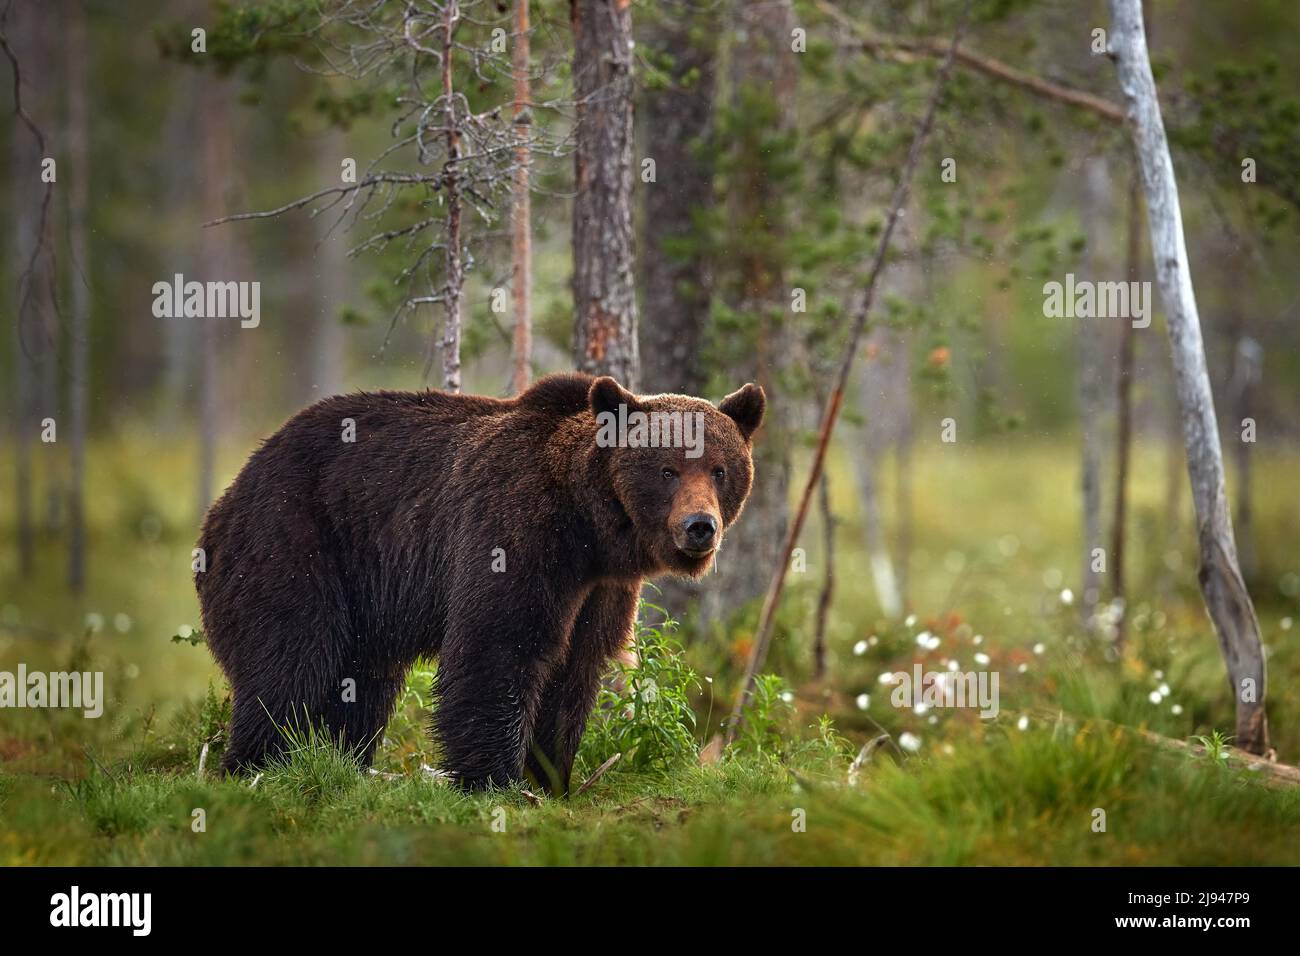 Summer wildlife. Bear standing,  sit up on its hind legs, somerr forest with cotton grass.  Dangerous animal in nature forest and meadow habitat. Wild Stock Photo